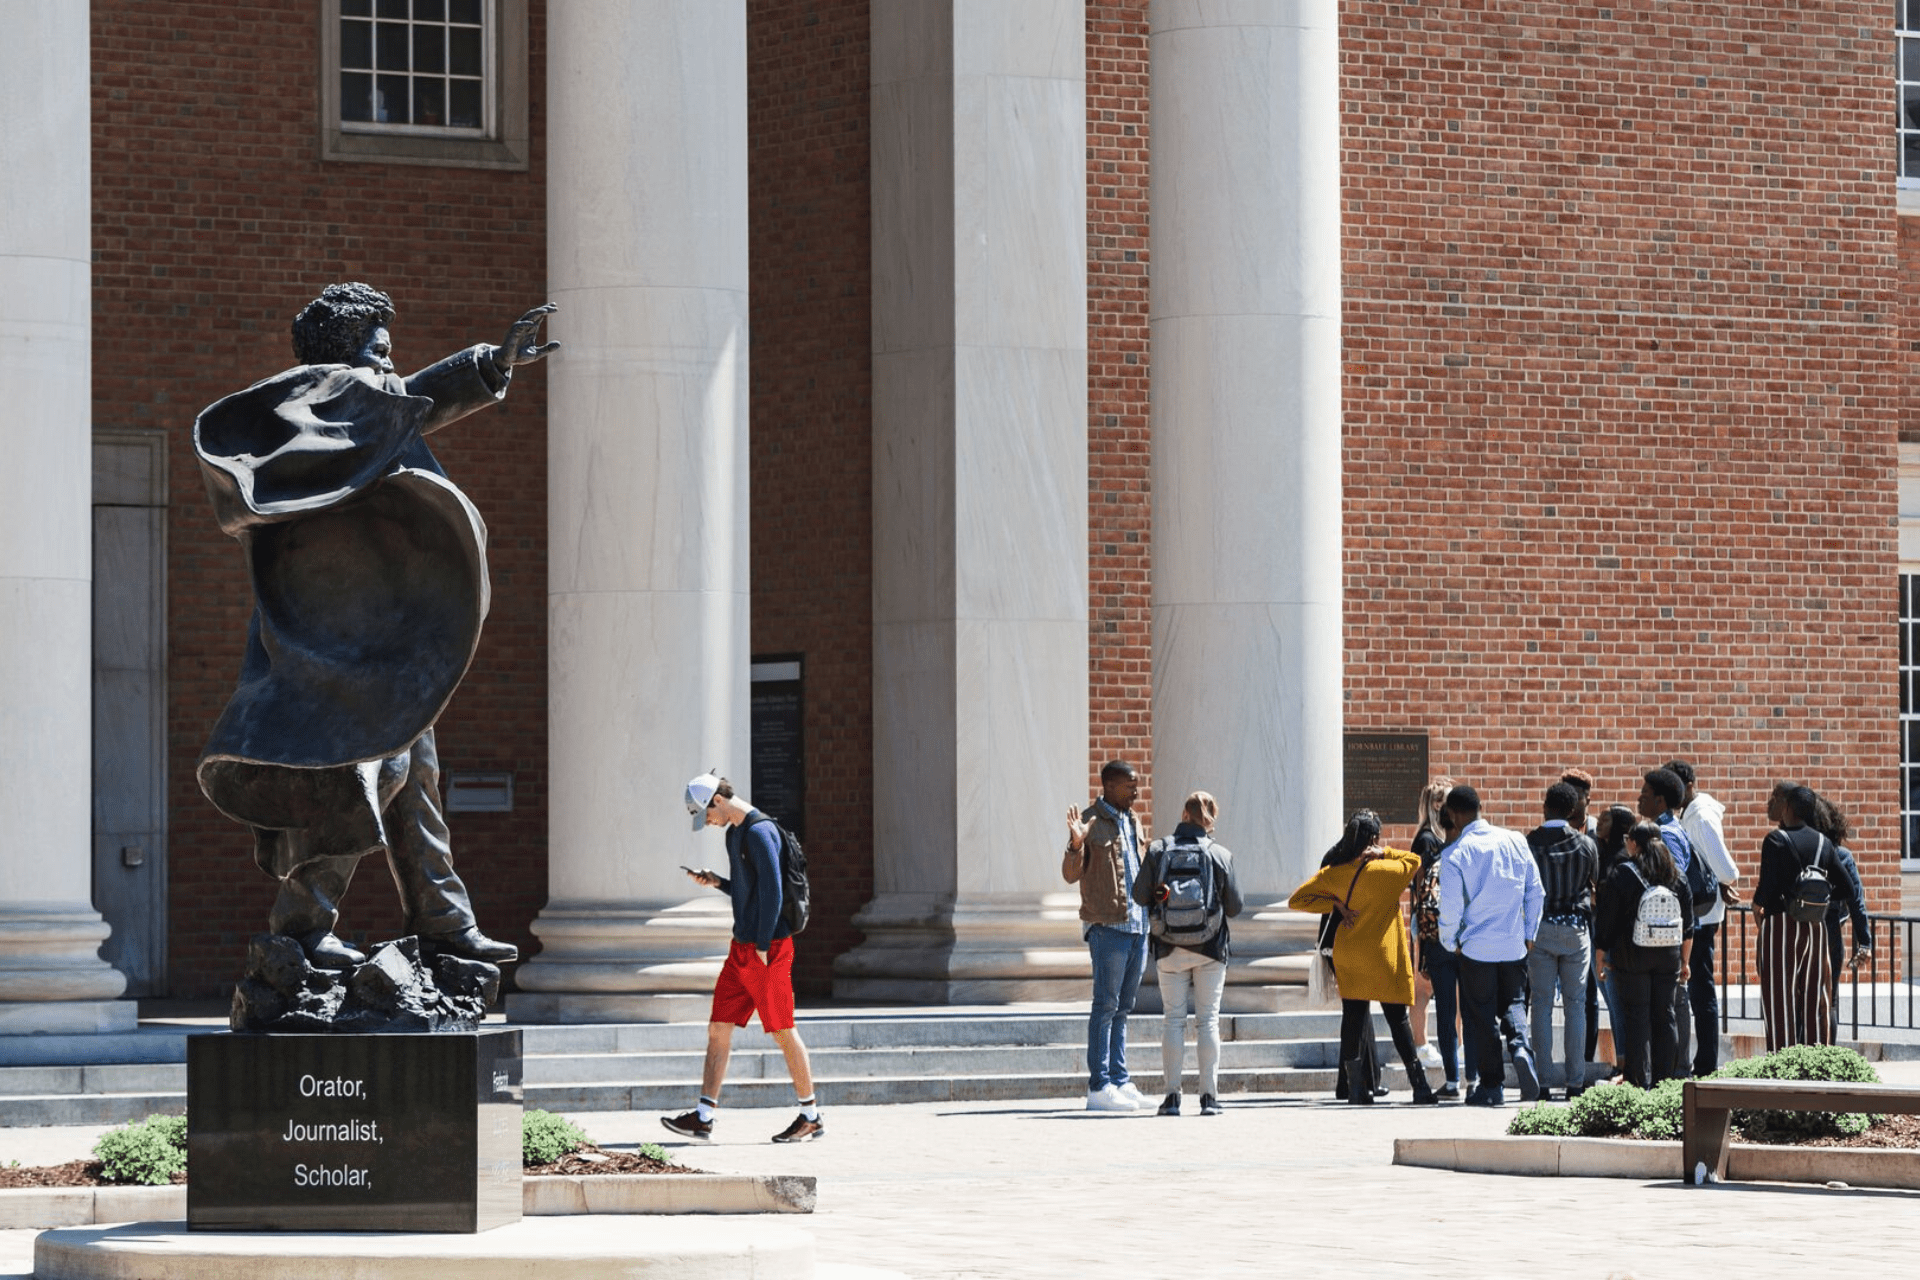 Frederick Douglass Square and Statue in front of Hornbake Library with students and people in the background